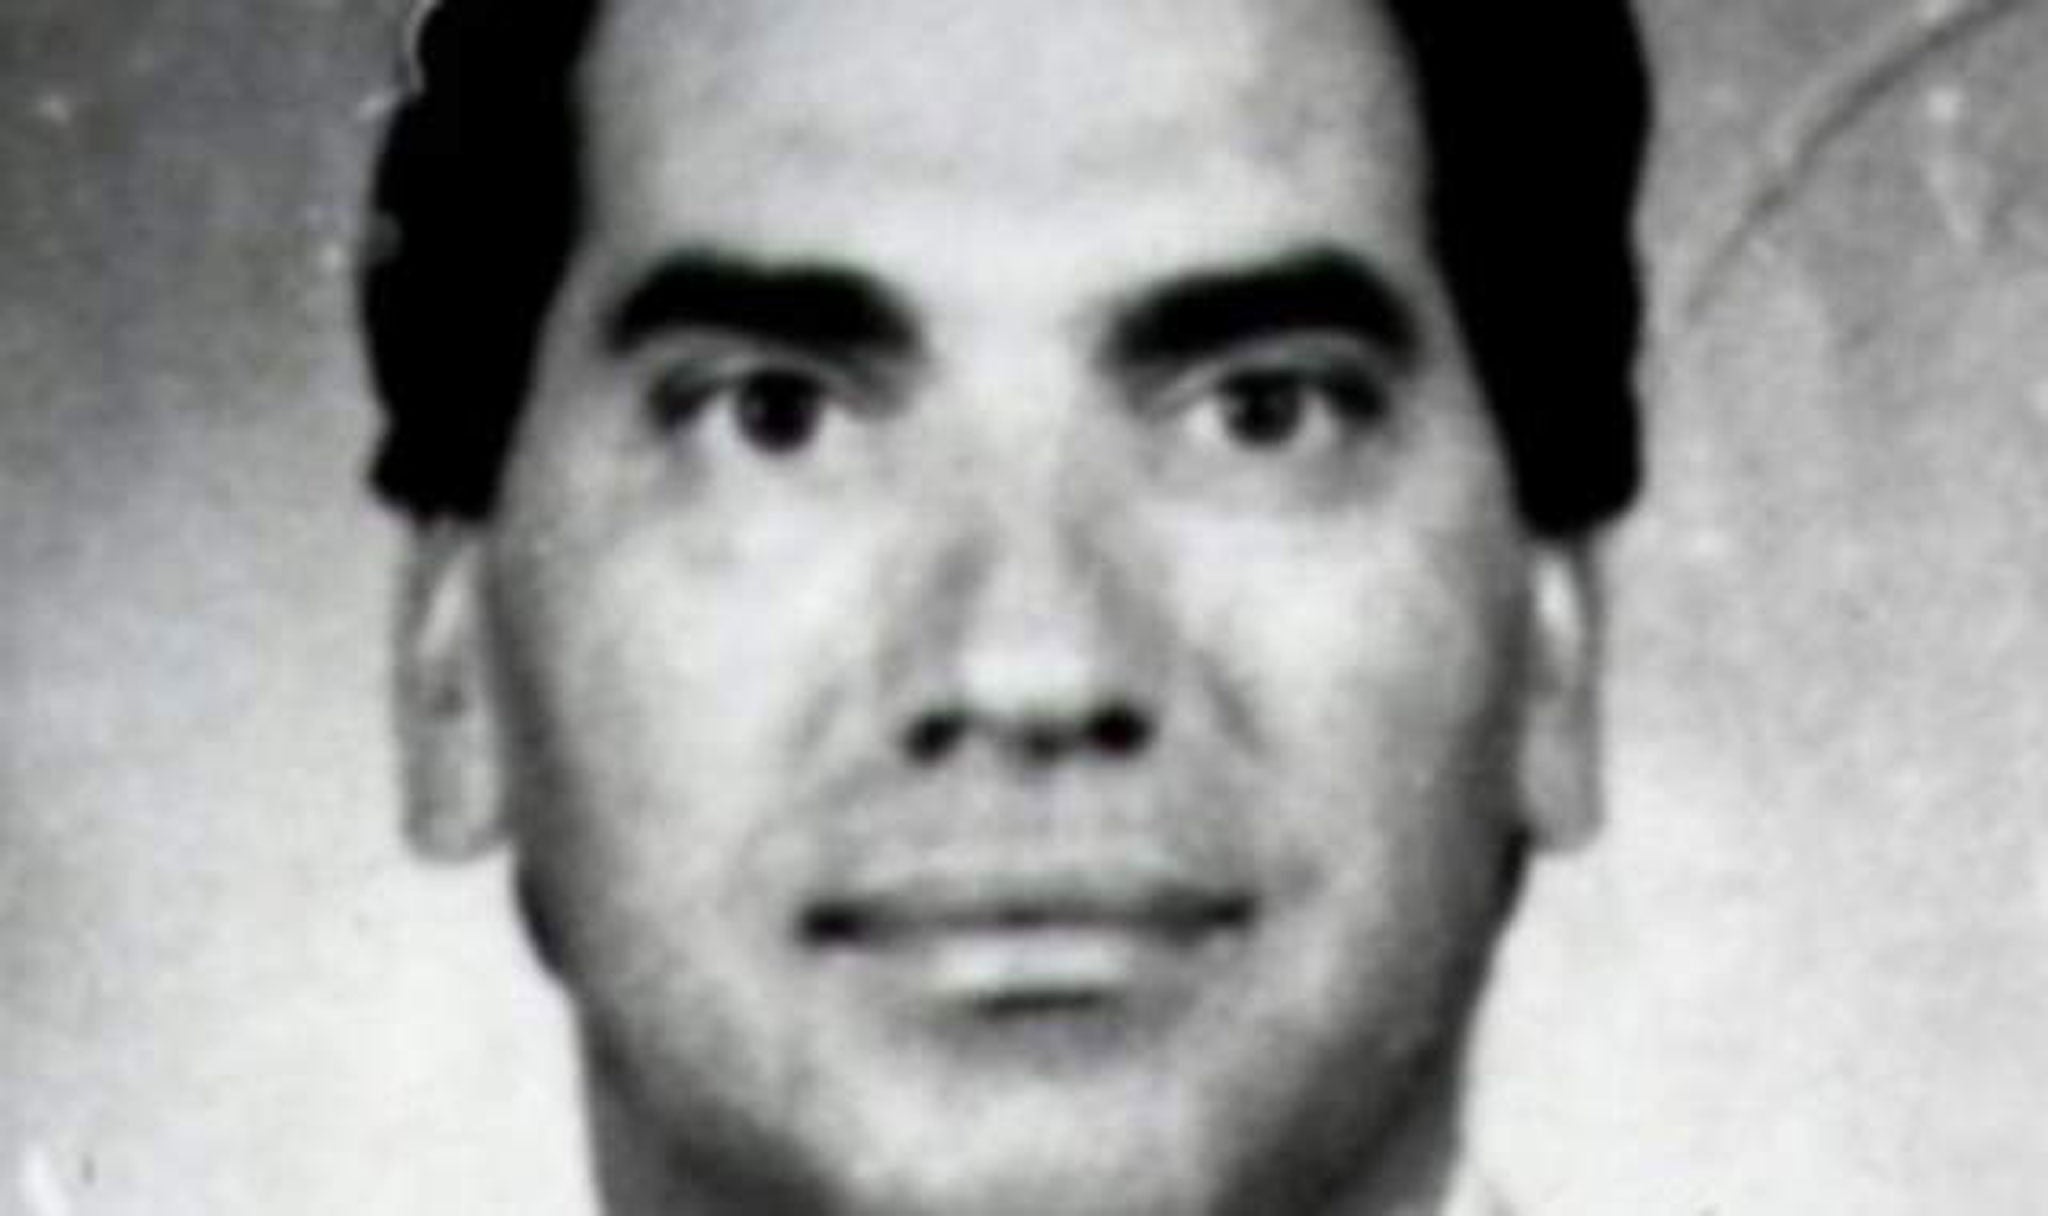 Sicilian mafia boss Domenico Rancadore has been arrested in London after 19 years on the run.